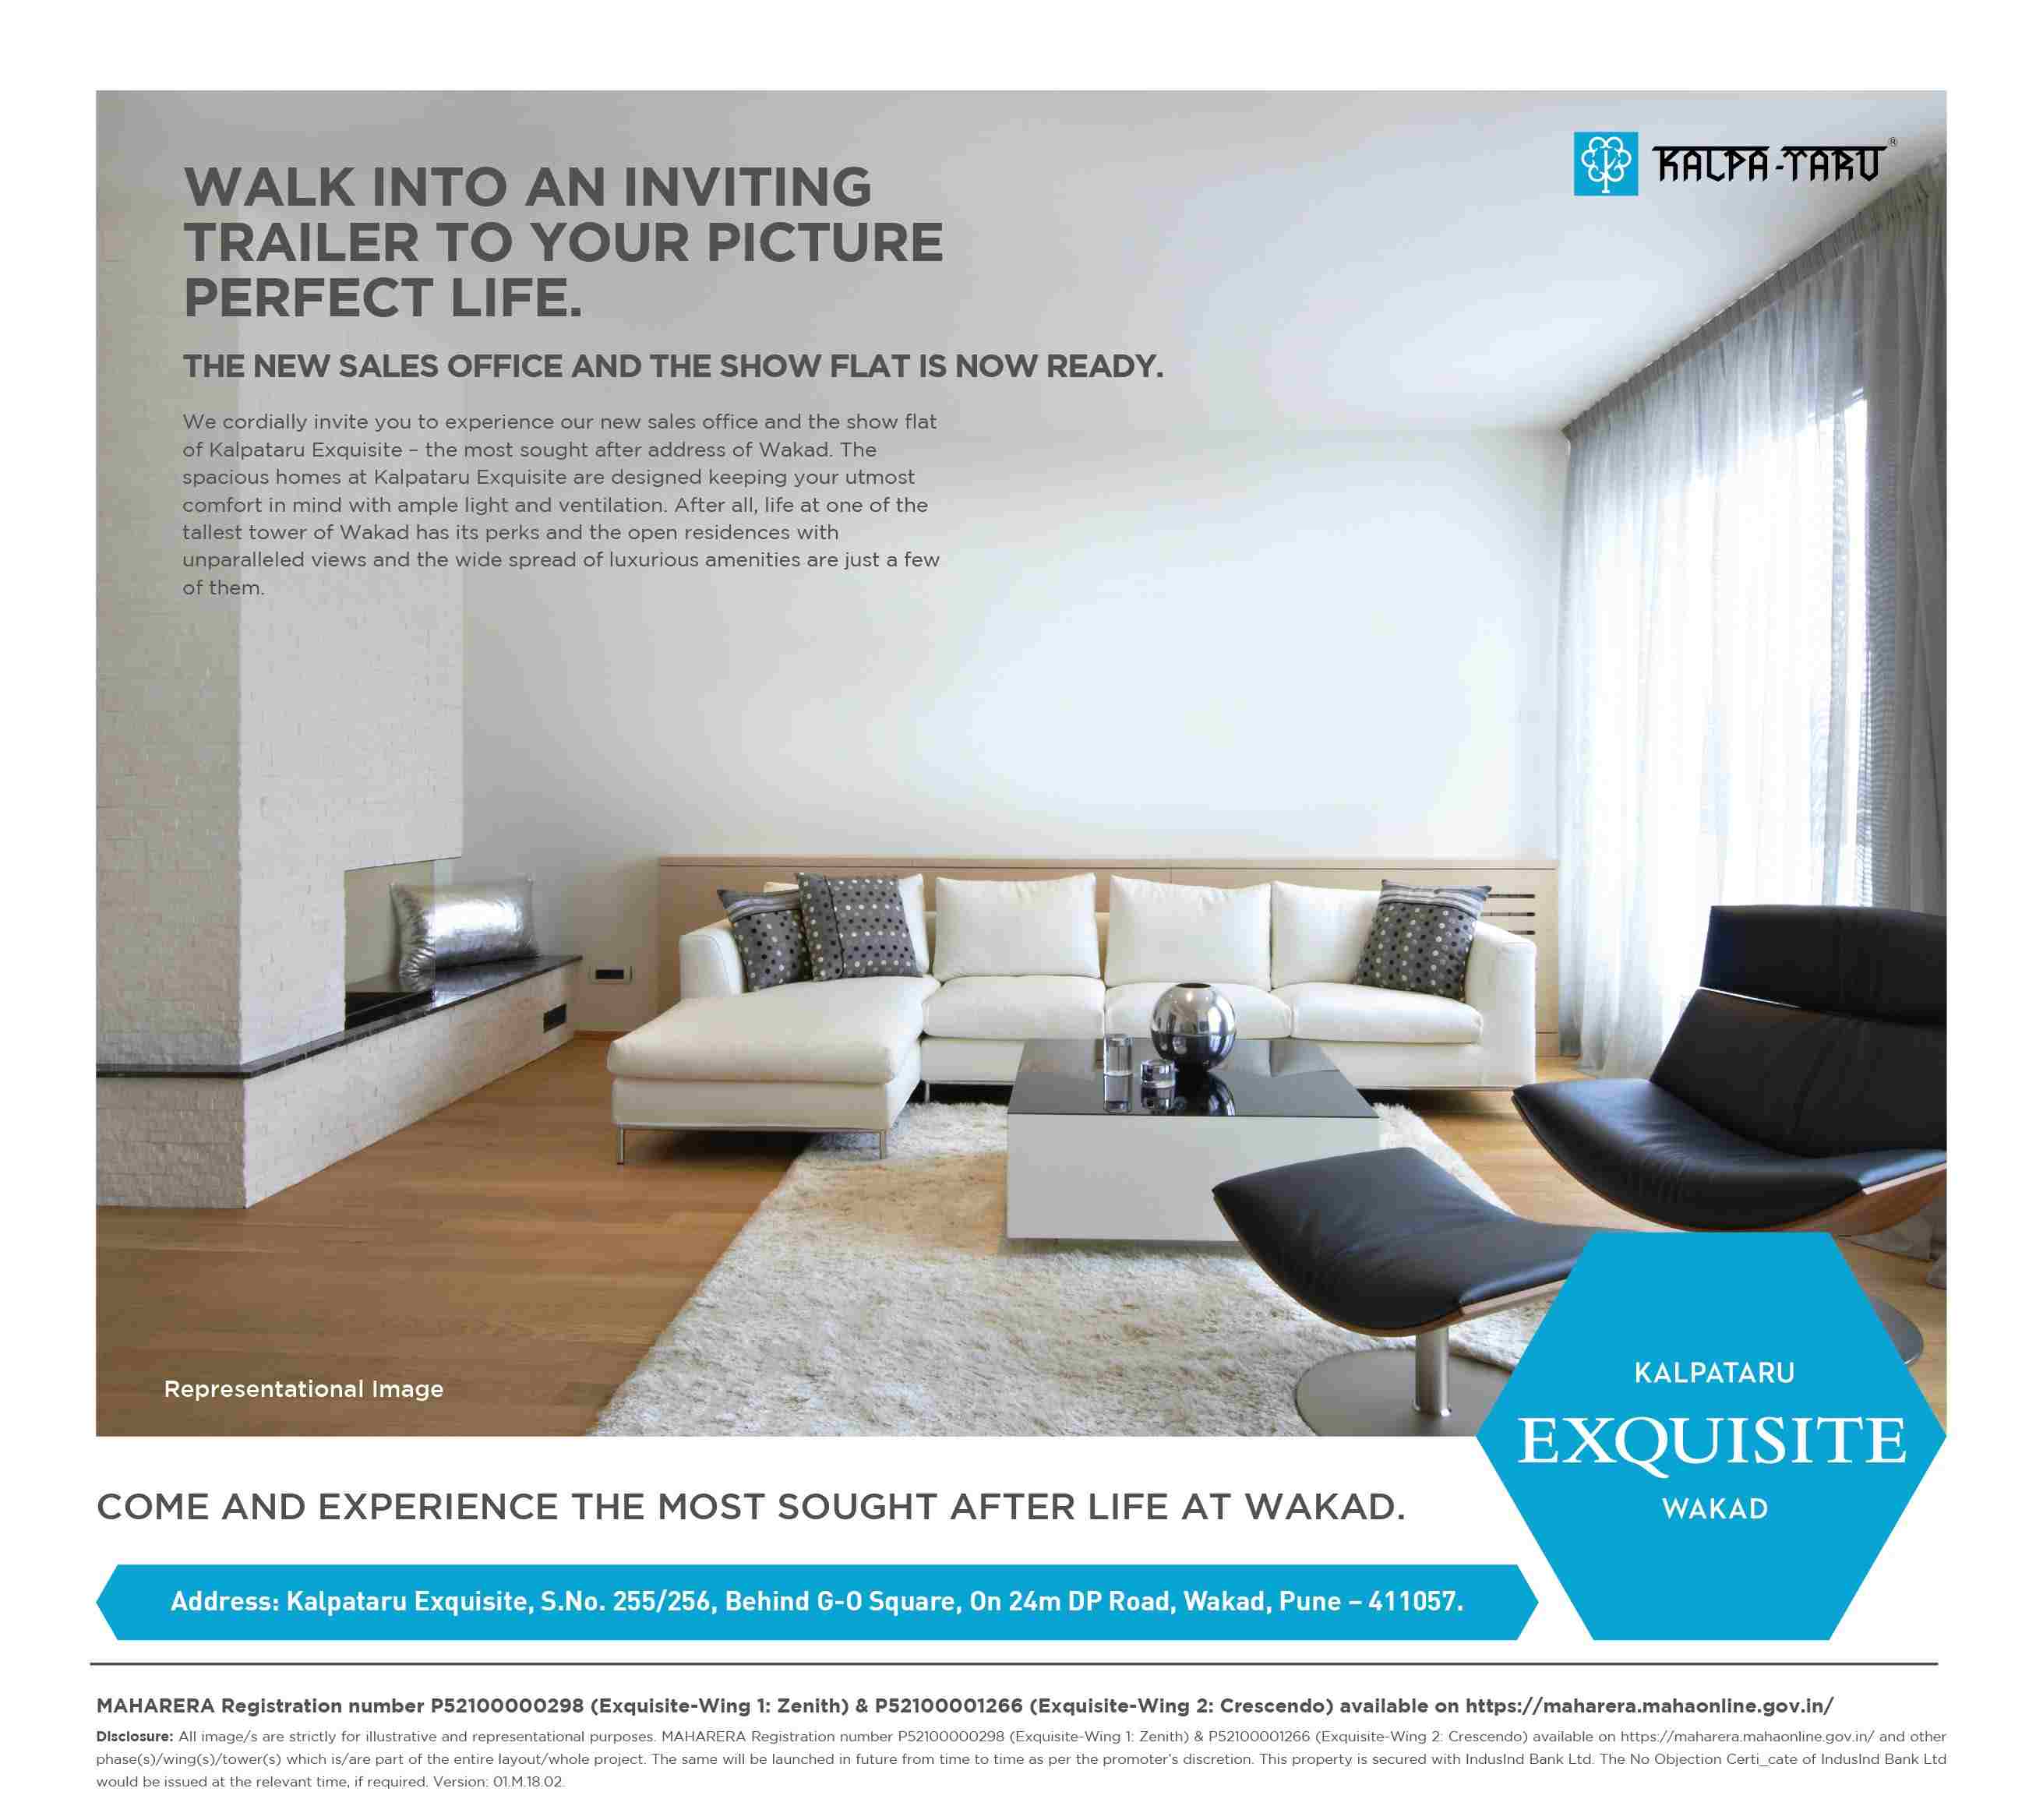 New sales office and the show flat is now ready at Kalpataru Exquisite in Pune Update